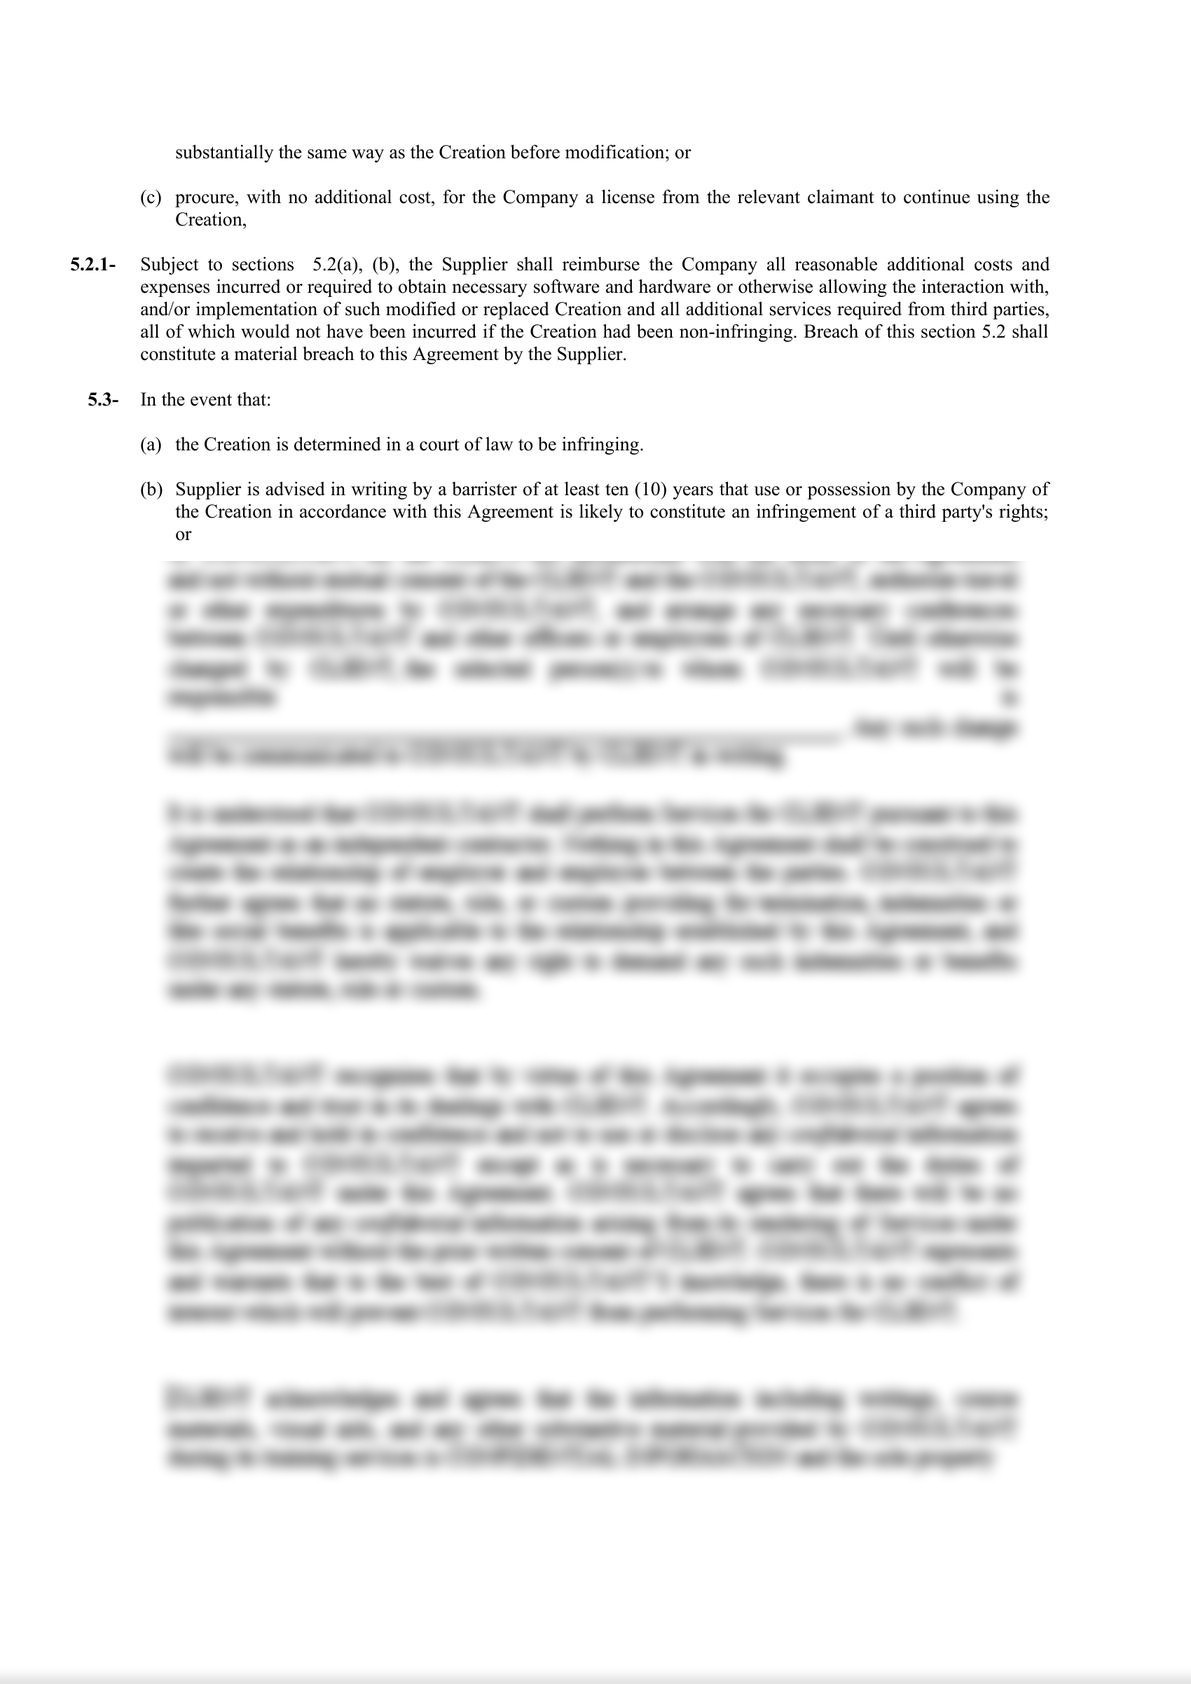 Master Service Agreement (Company / Supplier) -5